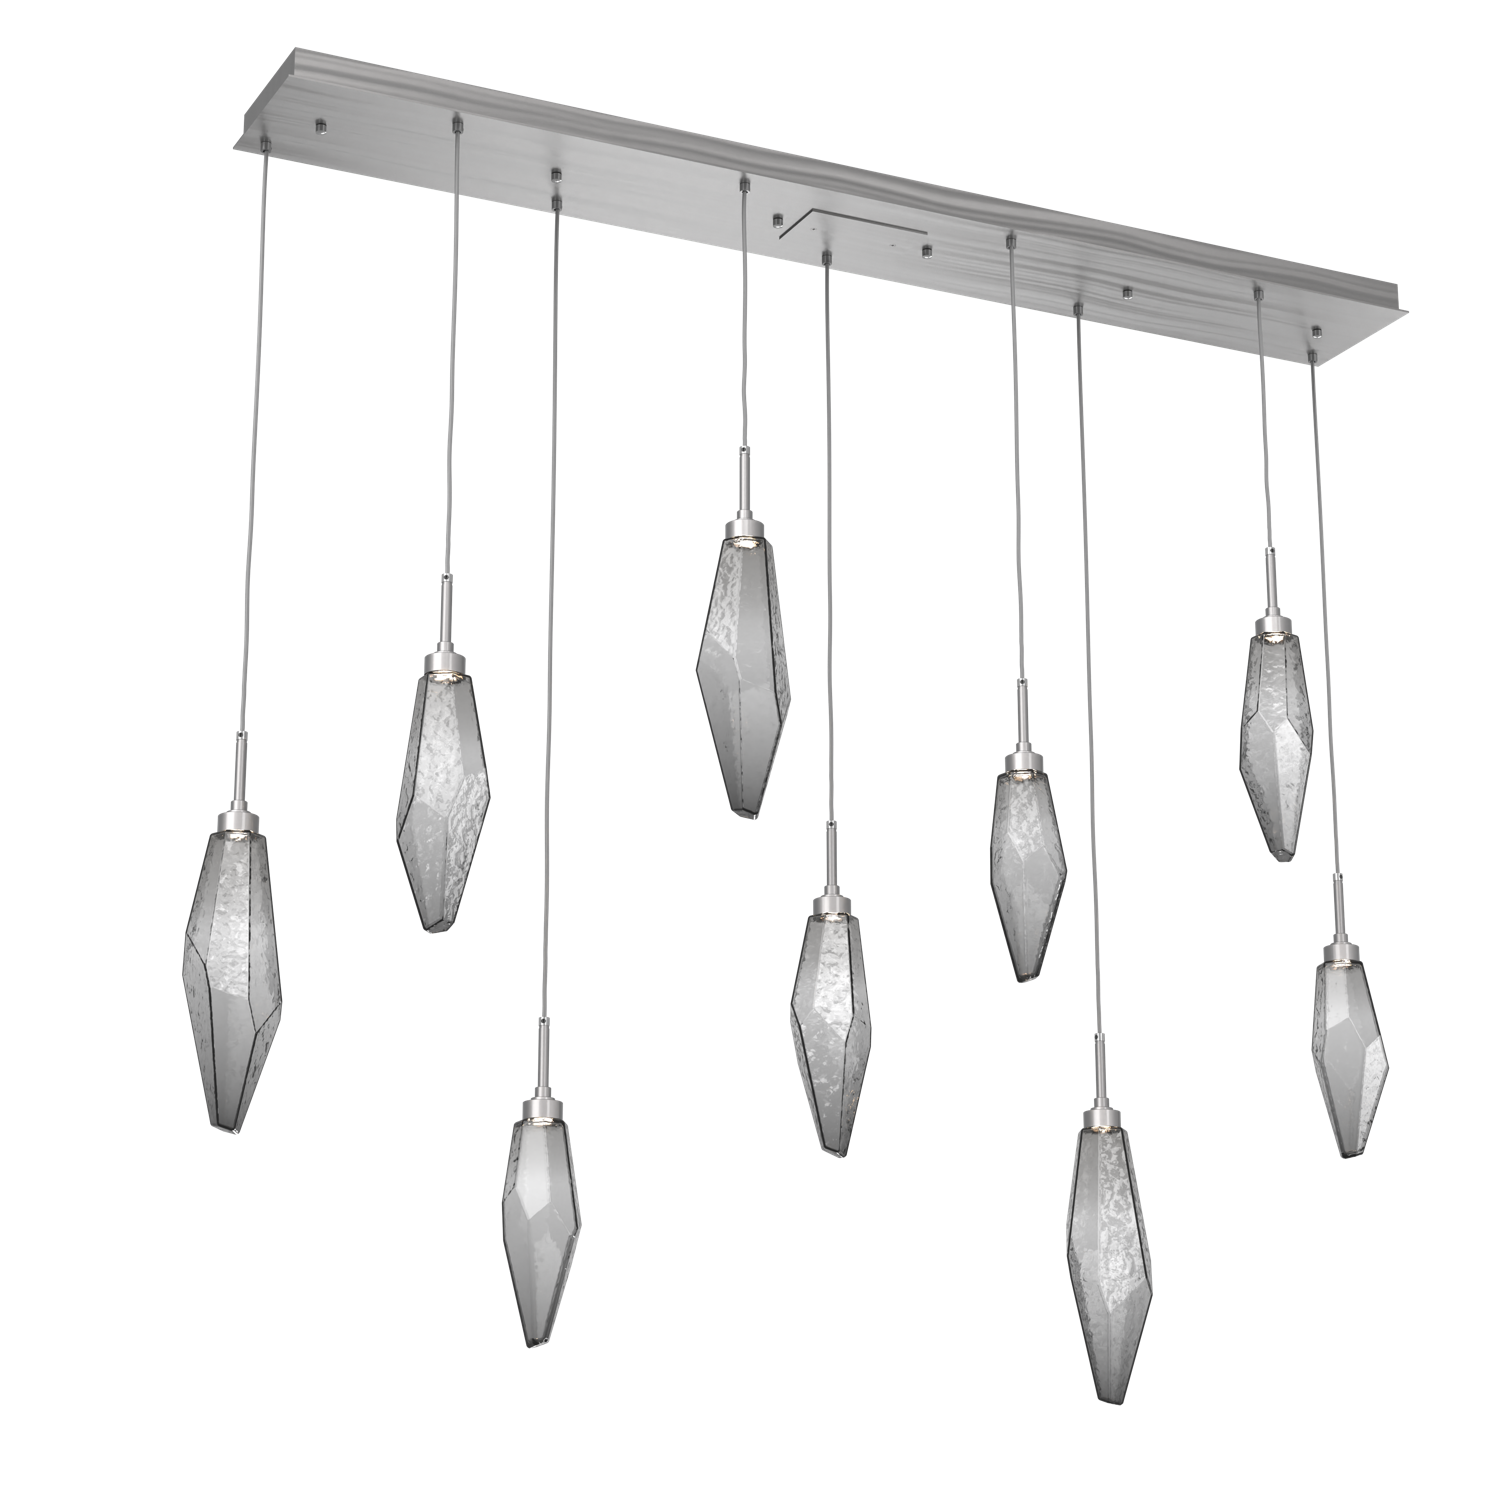 PLB0050-09-SN-CS-Hammerton-Studio-Rock-Crystal-9-light-linear-pendant-chandelier-with-satin-nickel-finish-and-chilled-smoke-glass-shades-and-LED-lamping